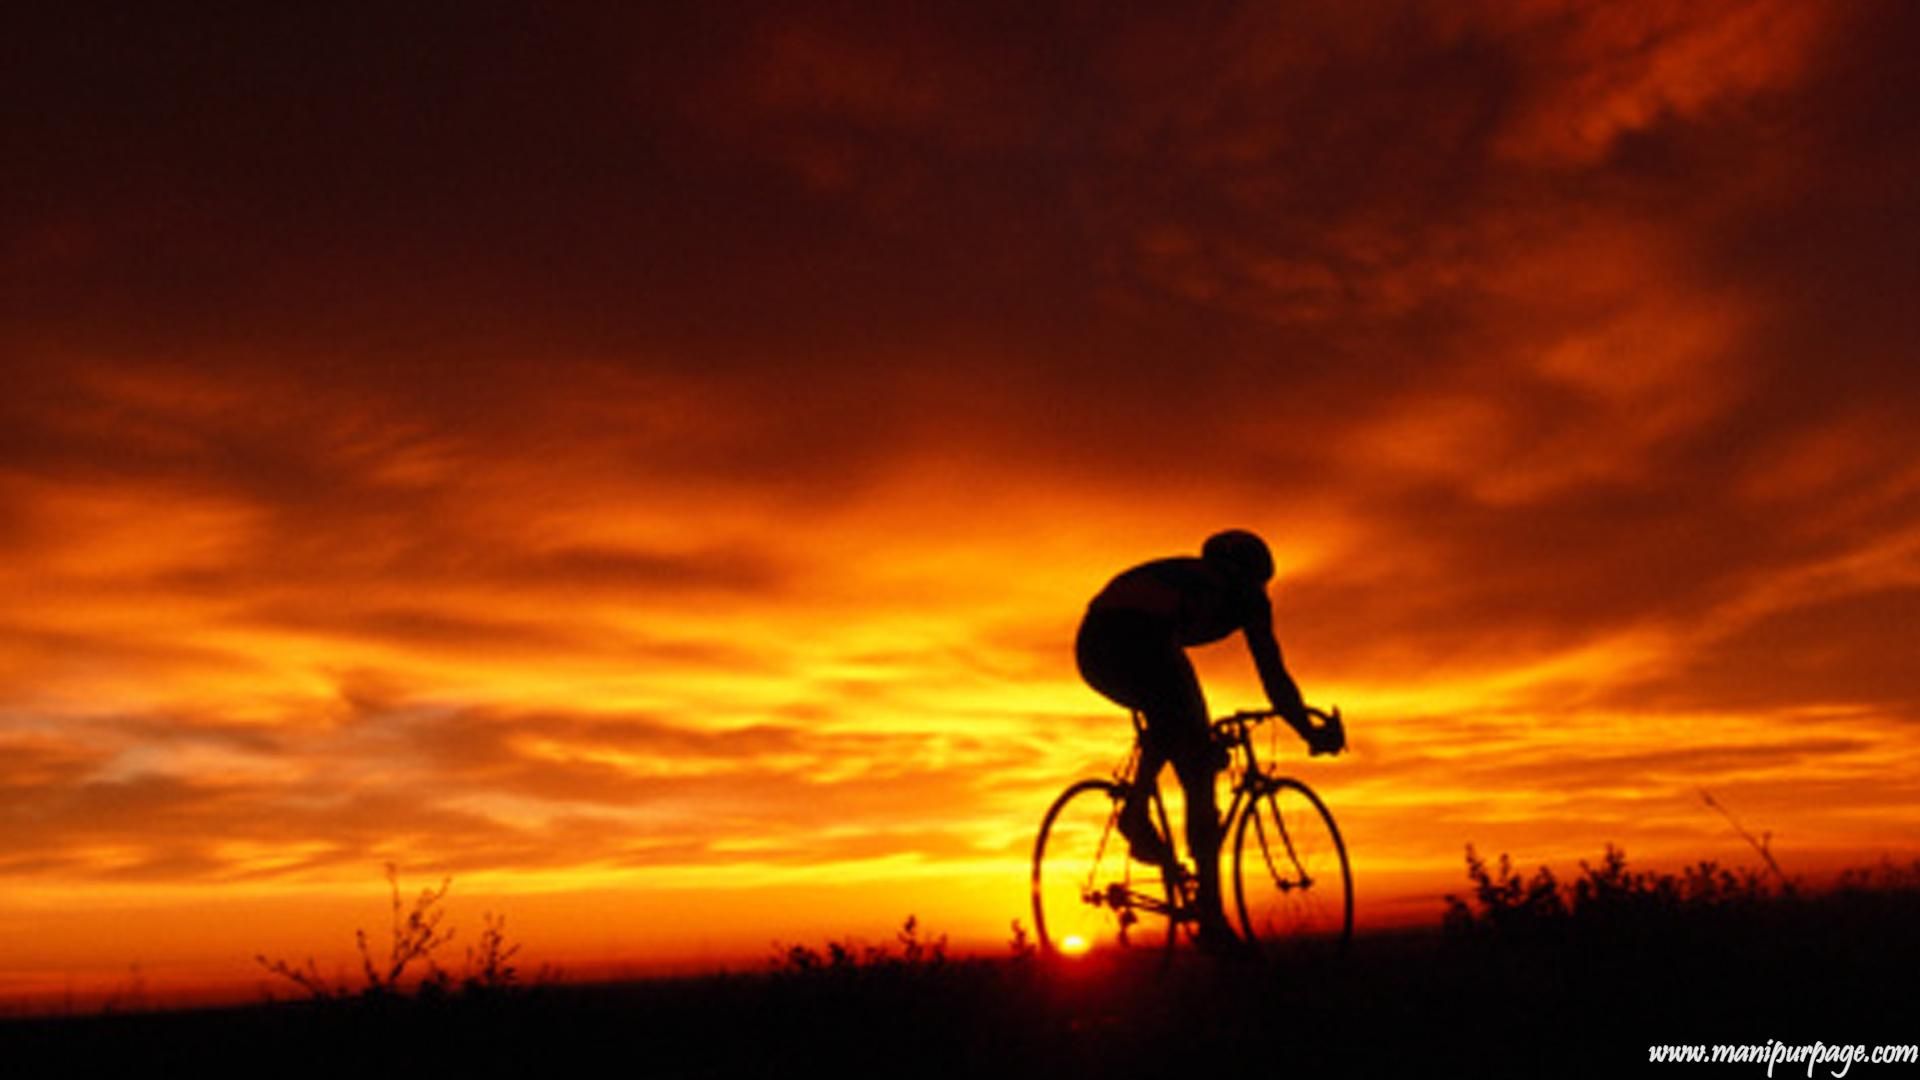 Sunset + Cycling = Bliss | Bikes ( cycles ) | Pinterest | Cycling ...